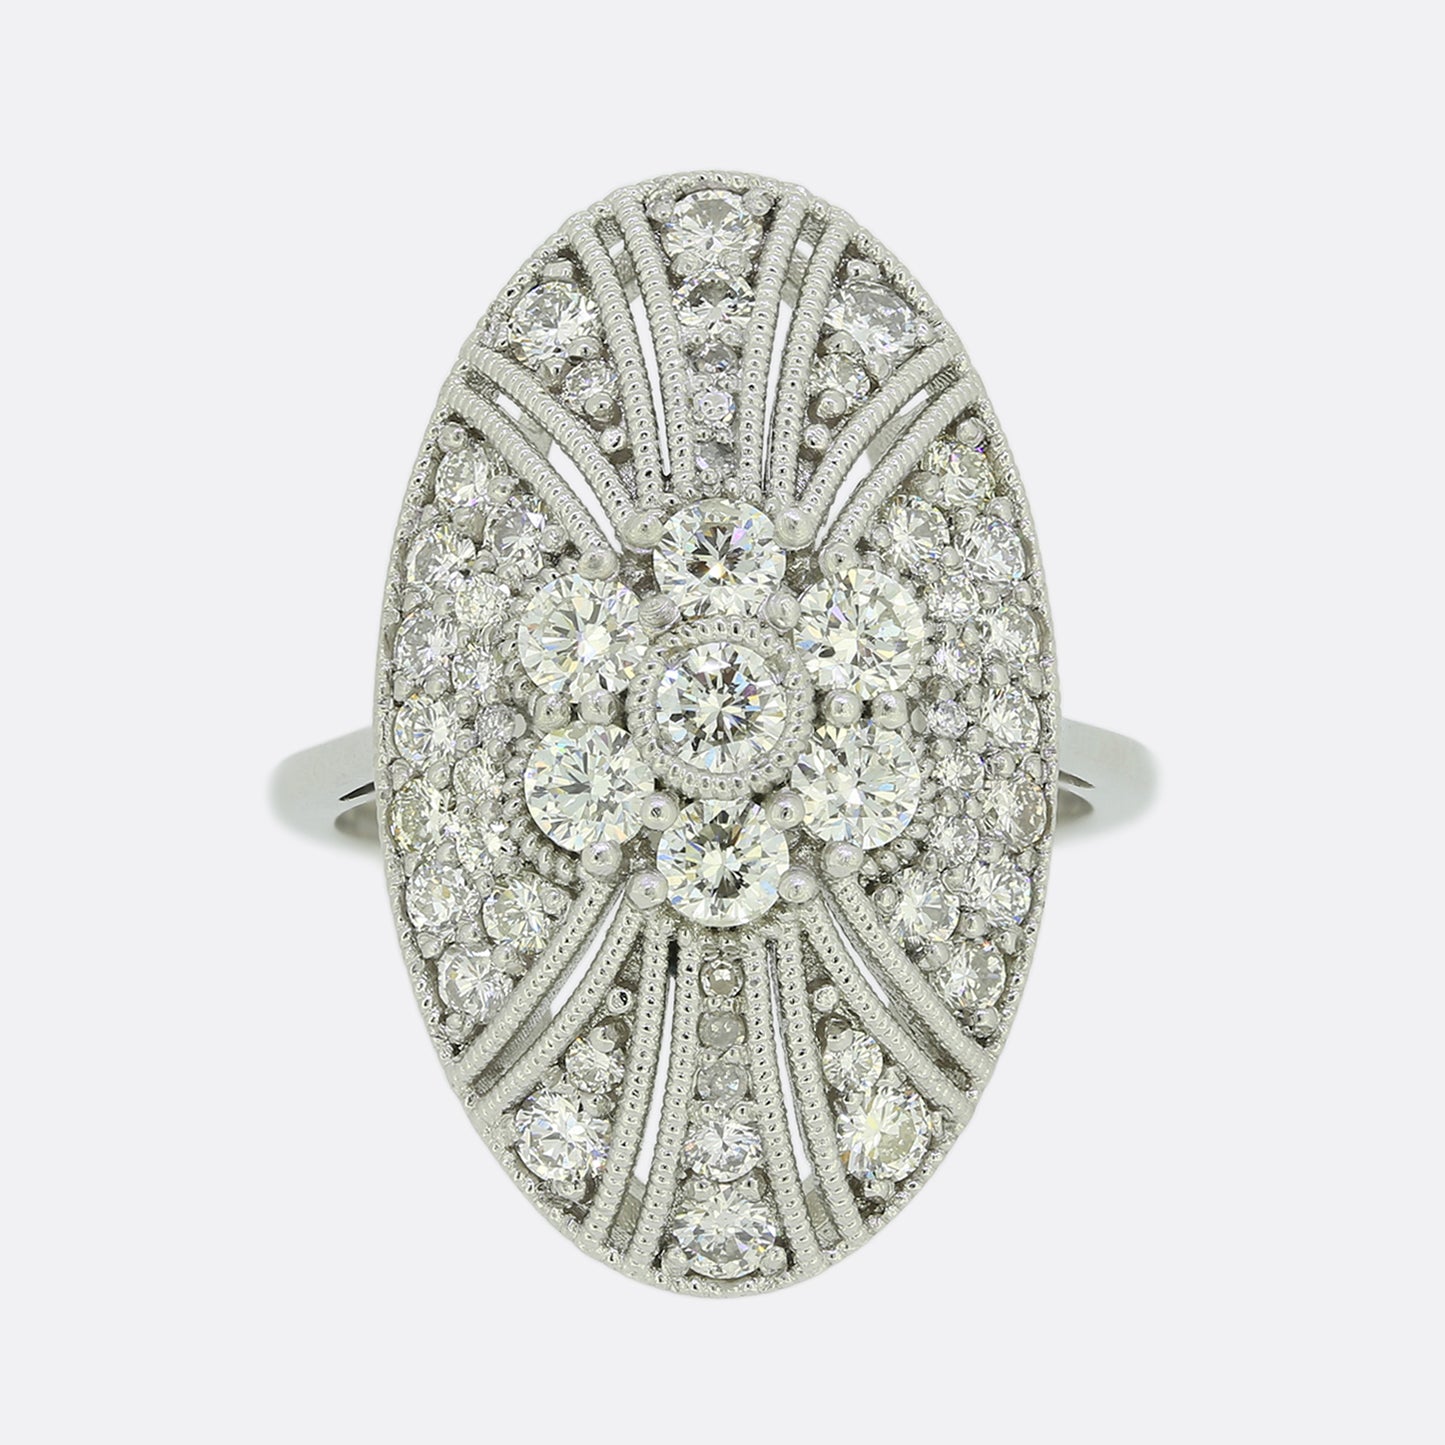 Diamond Daisy Cluster Cocktail Ring